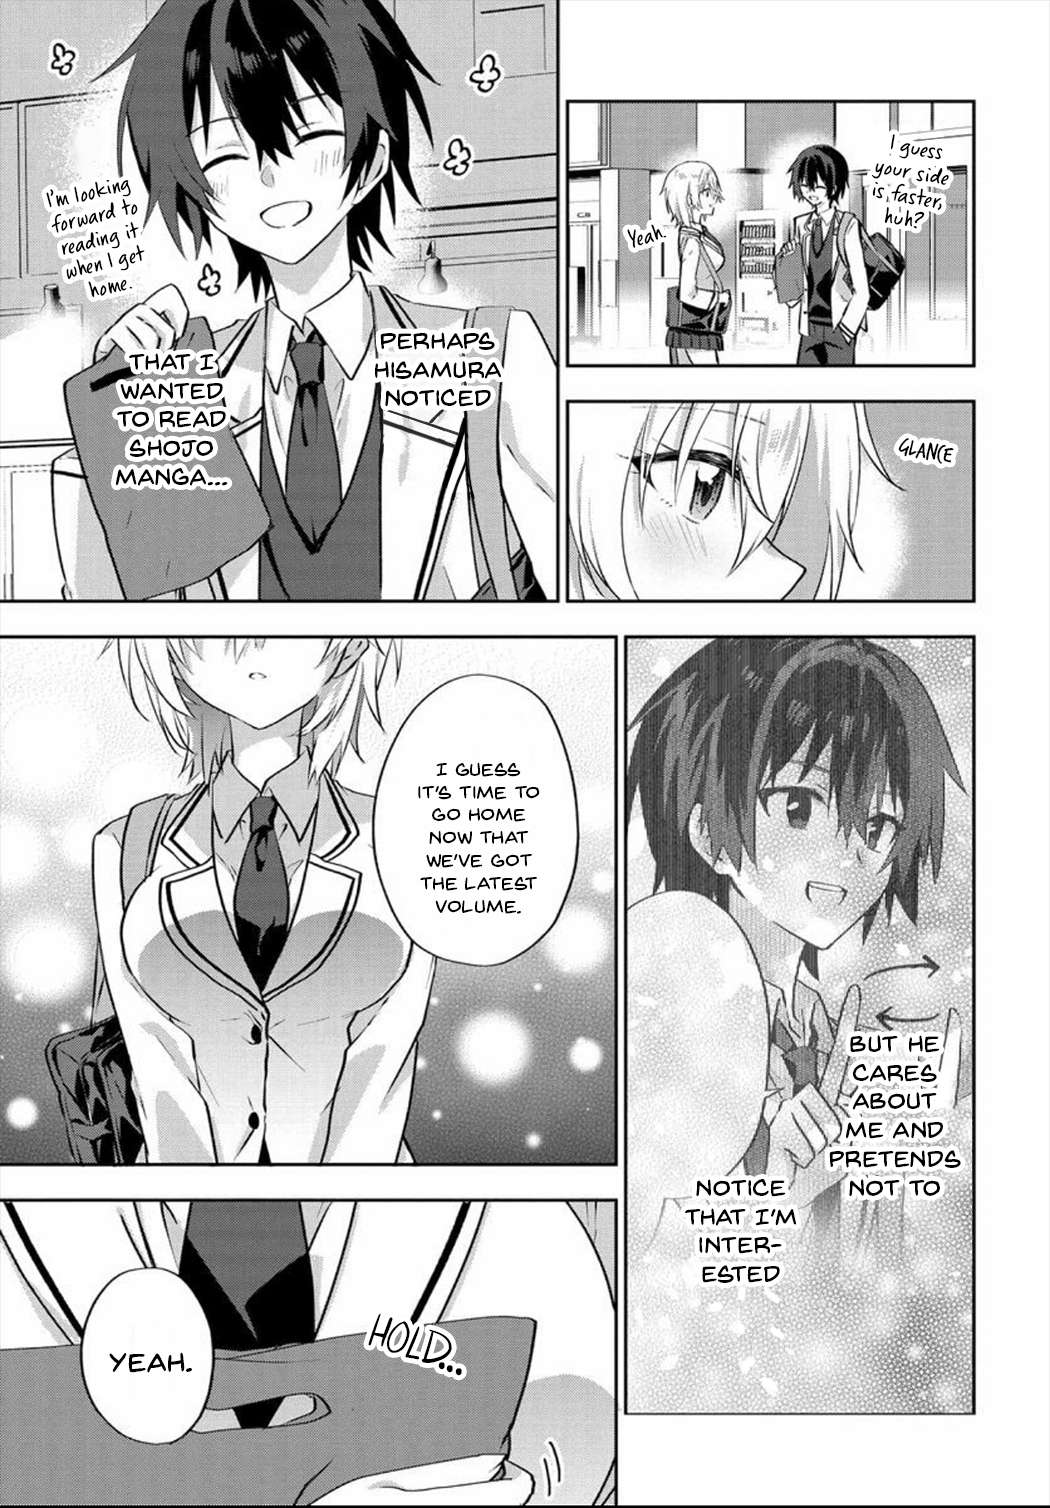 Since I’ve Entered the World of Romantic Comedy Manga, I’ll Do My Best to Make the Losing Heroine Happy. - chapter 5.2 - #2